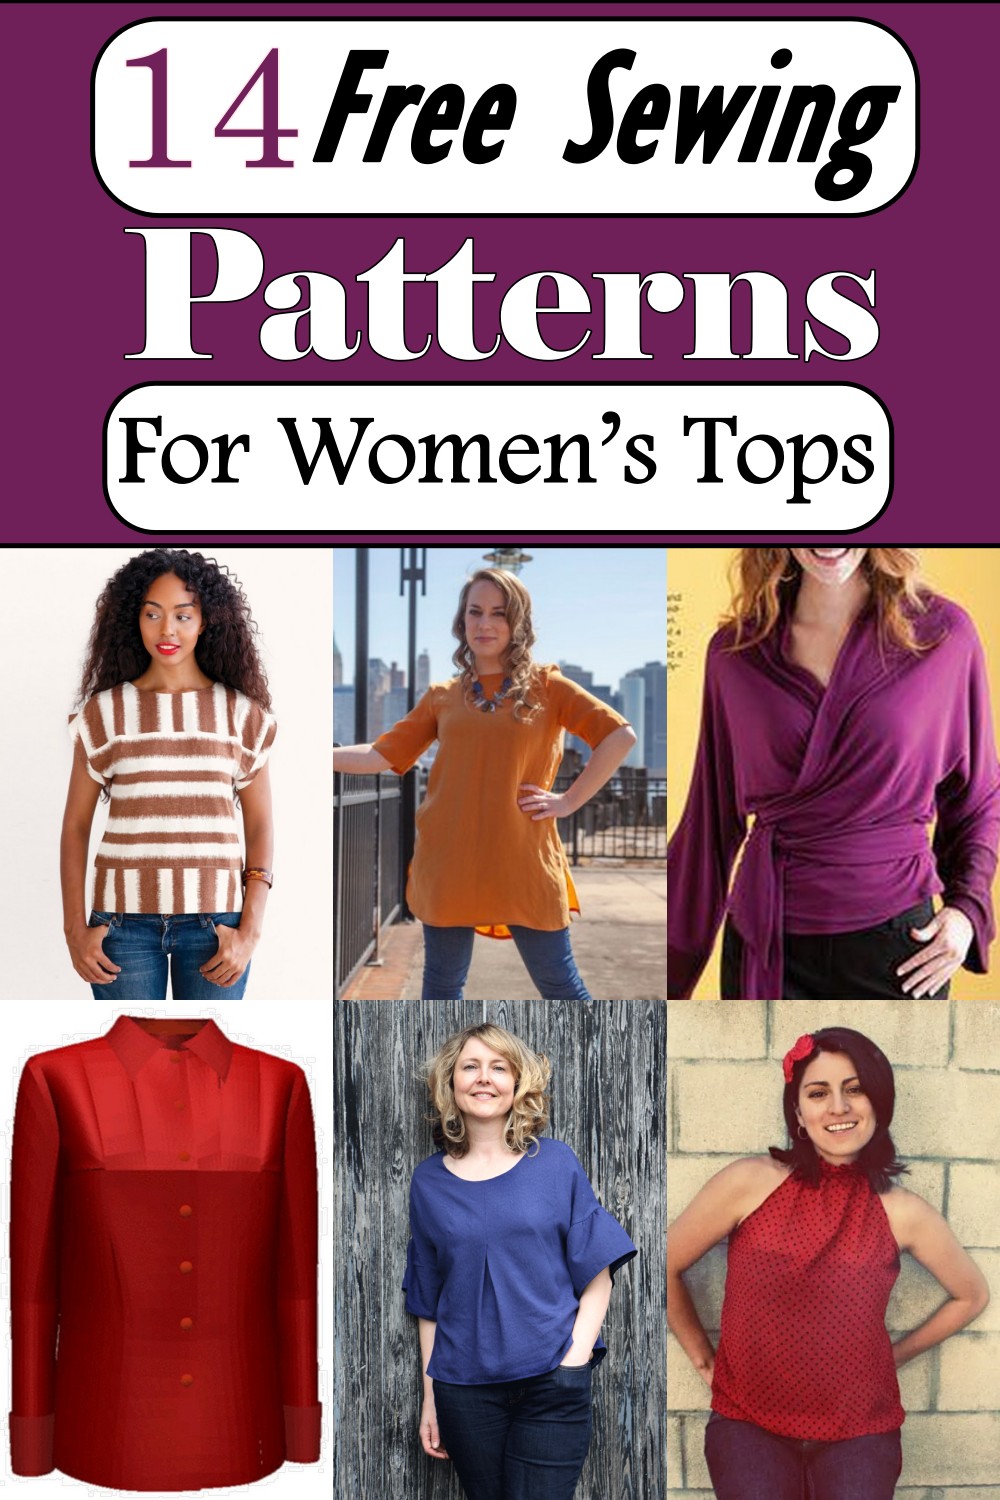 Free Sewing Patterns For Women’s Tops